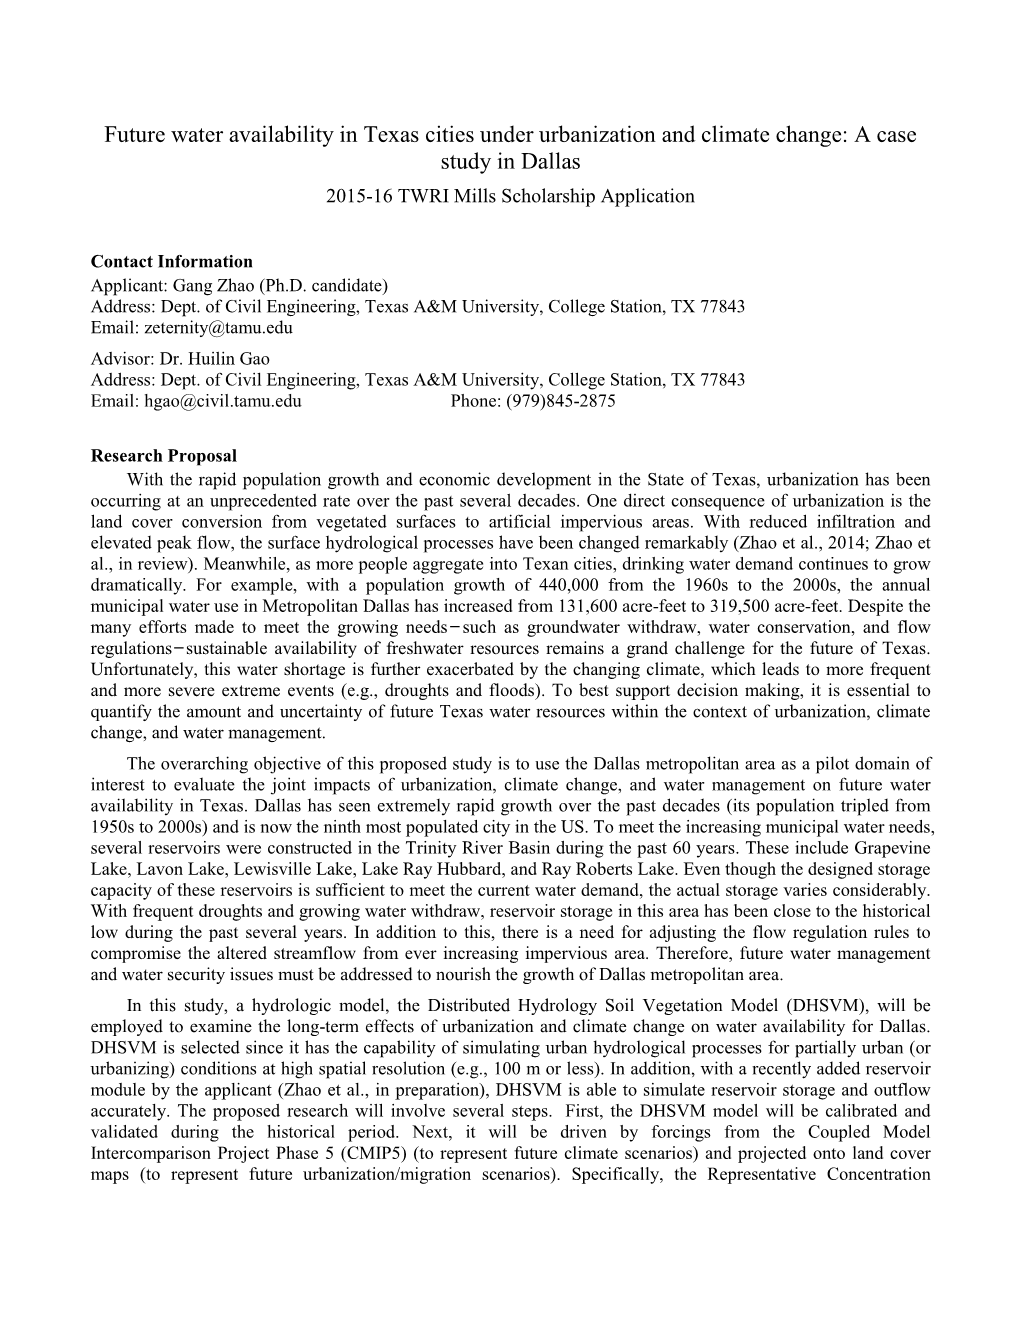 Future Water Availability in Texas Cities Under Urbanization and Climate Change: a Case Study in Dallas 2015-16 TWRI Mills Scholarship Application